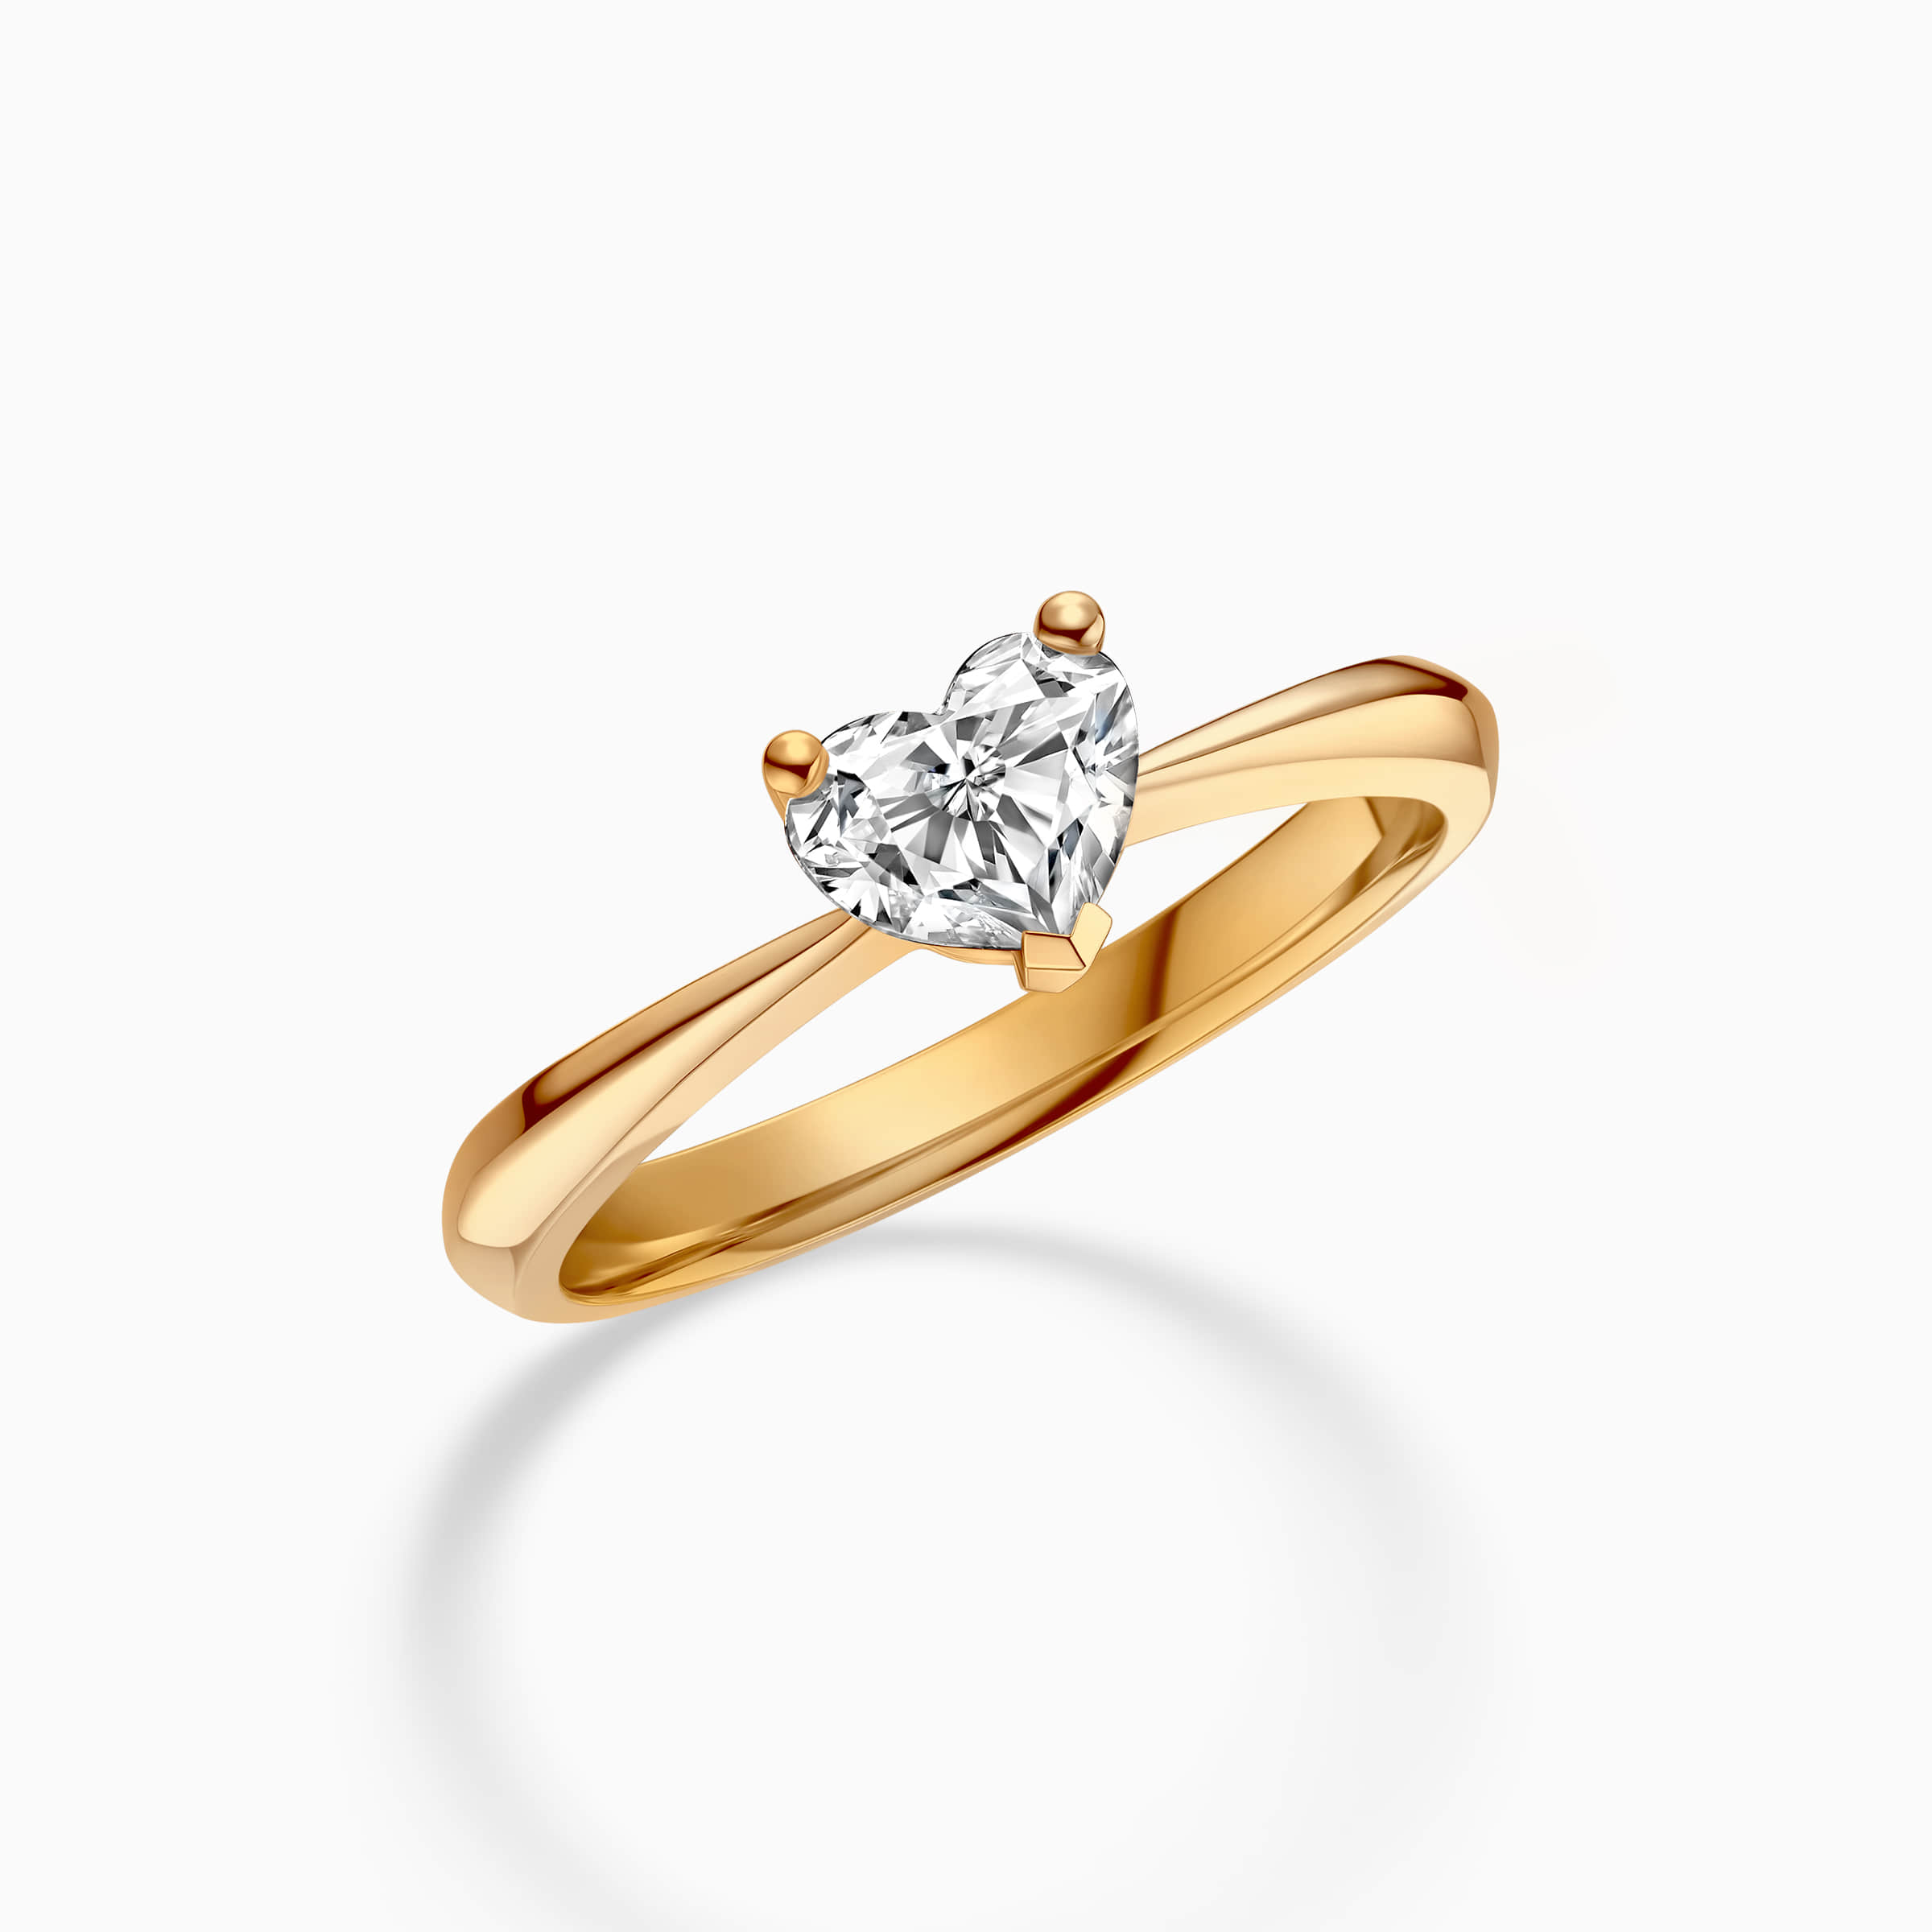 darry ring heart shaped solitaire diamond engagement ring yellow gold